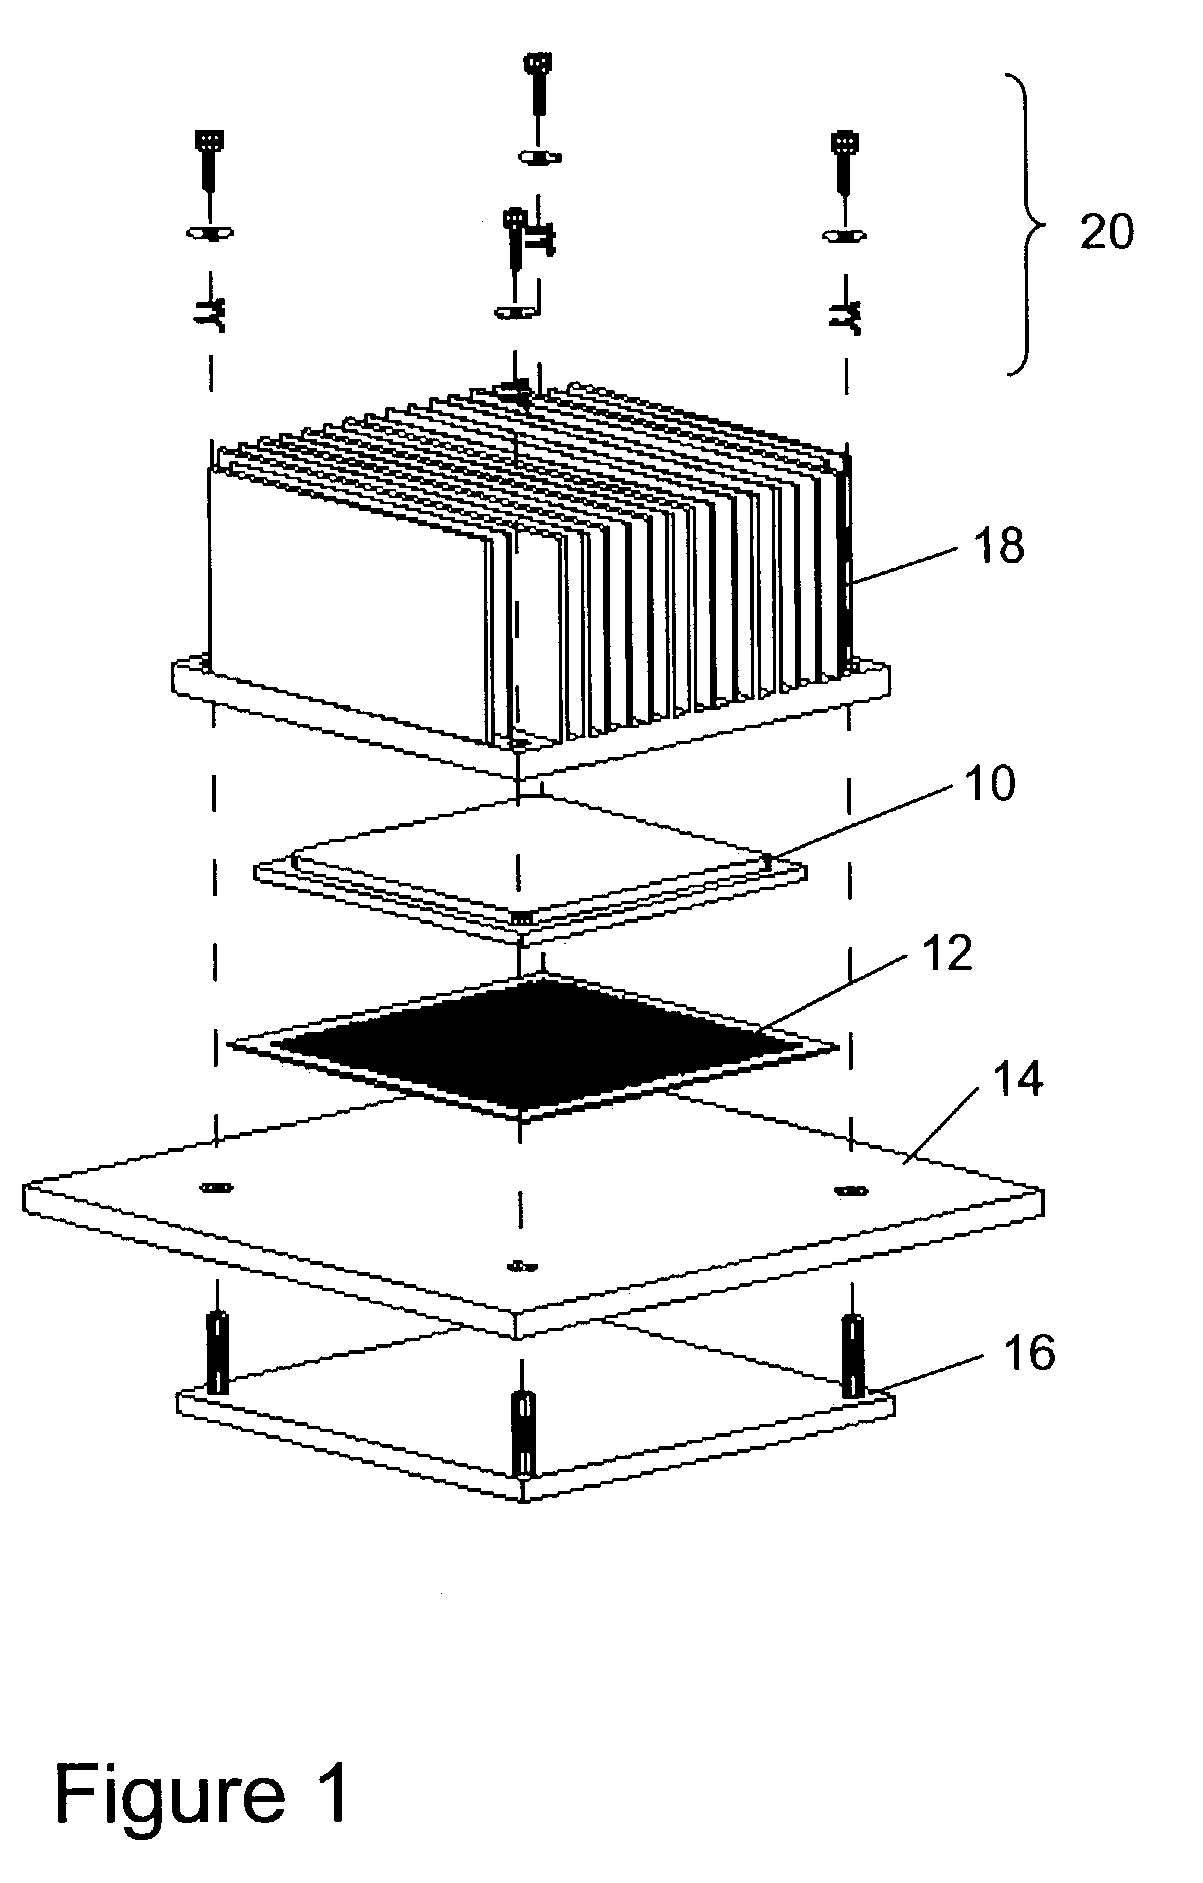 Contact grid array formed on a printed circuit board